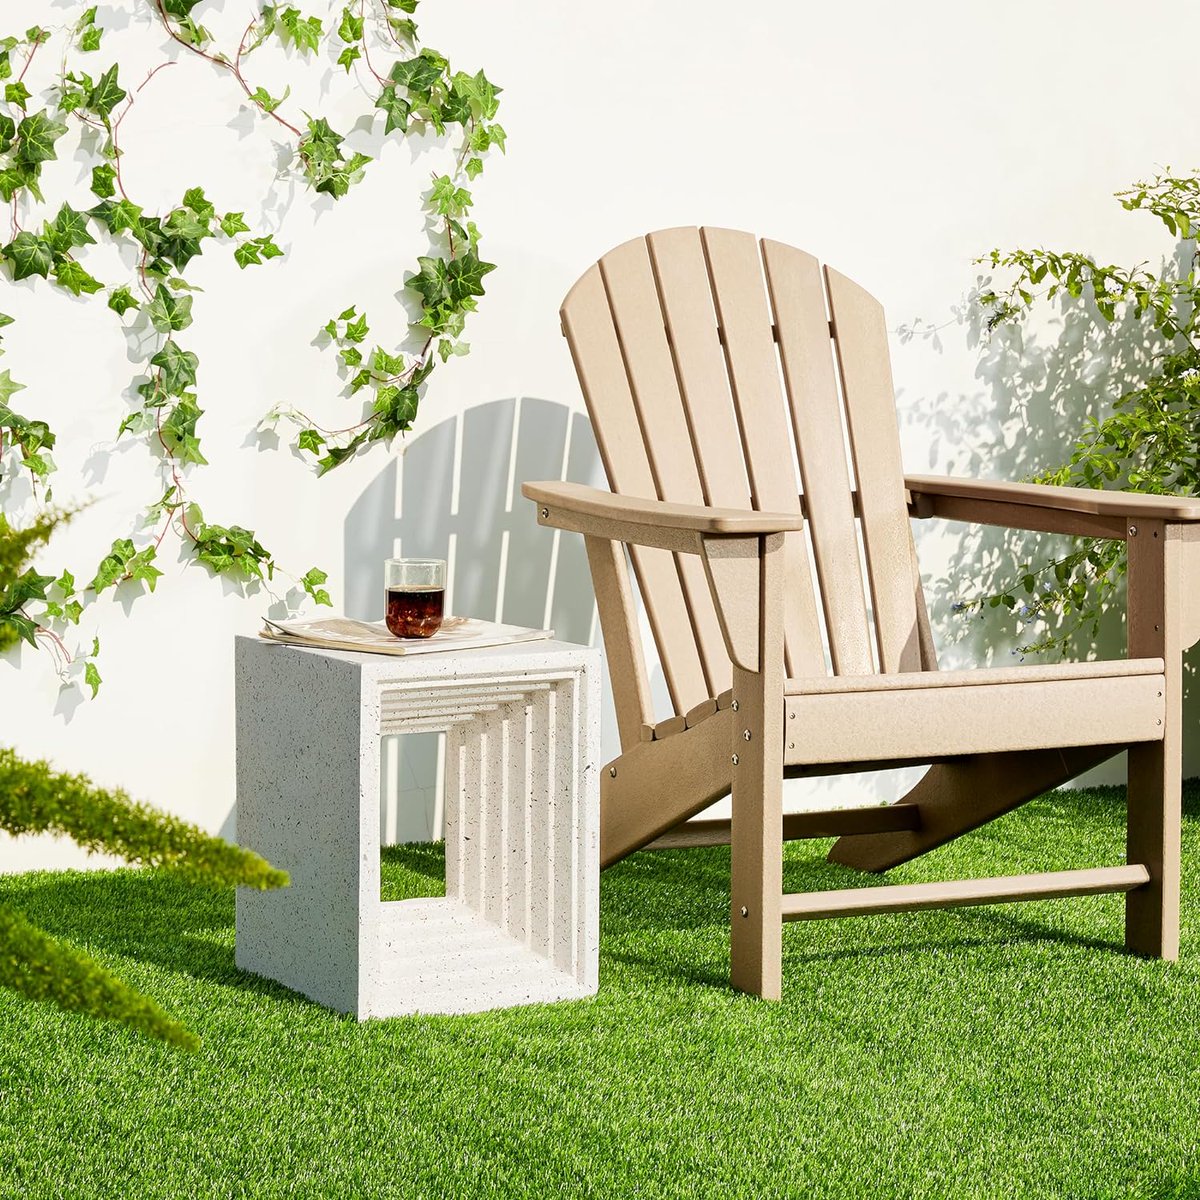 The multifunctional side table can be set up with anything you want and then enjoy the good times!
#gardendecor #stool